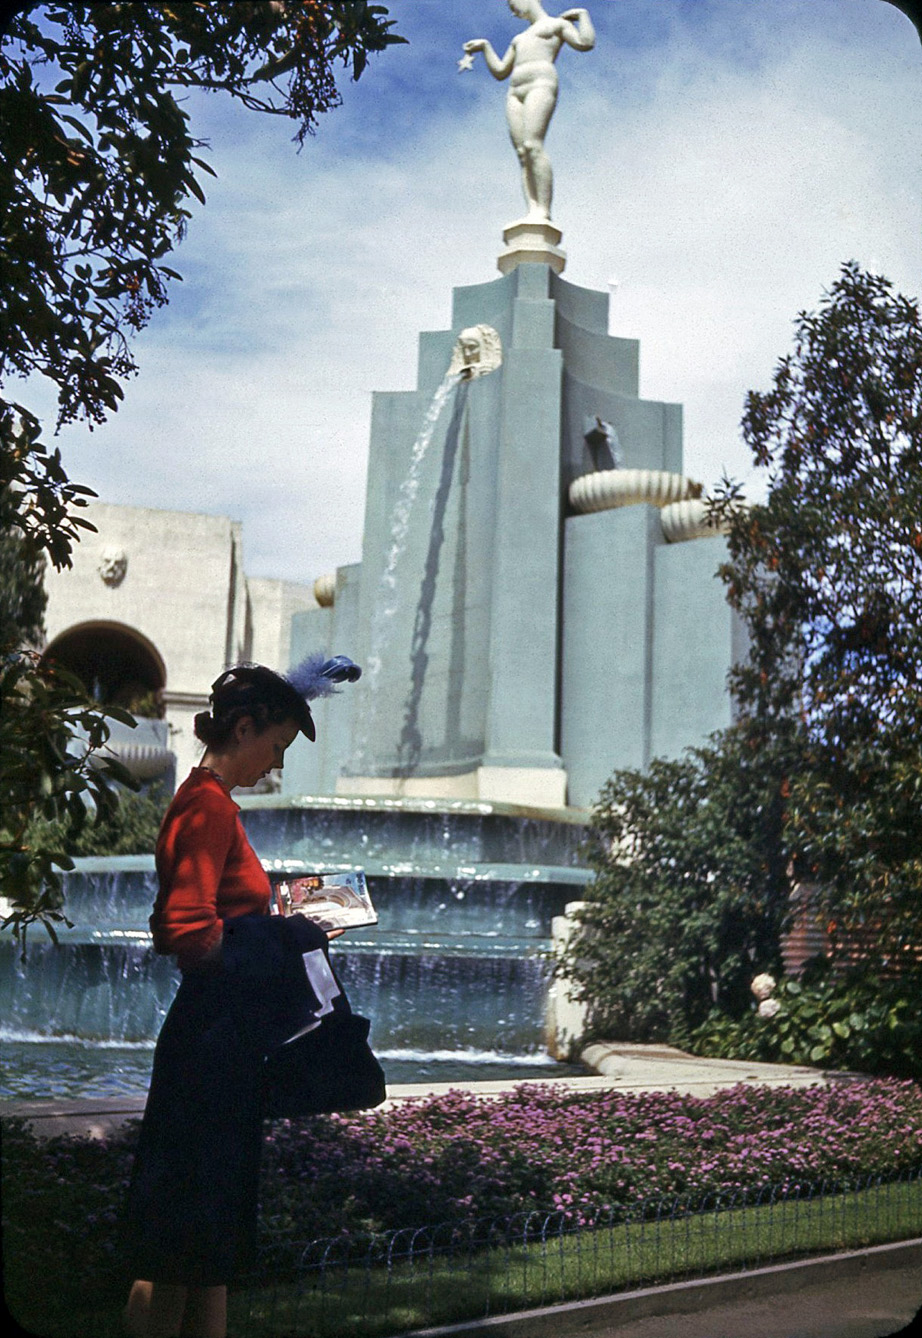 Golden Gate International Exposition, Treasure Island, San Francisco, 1940. The The woman with the hat at the Fountain of the Evening Star by sculptor Ettore Cadorin. From a box of Kodachrome slides I found at a flea market. View full size.